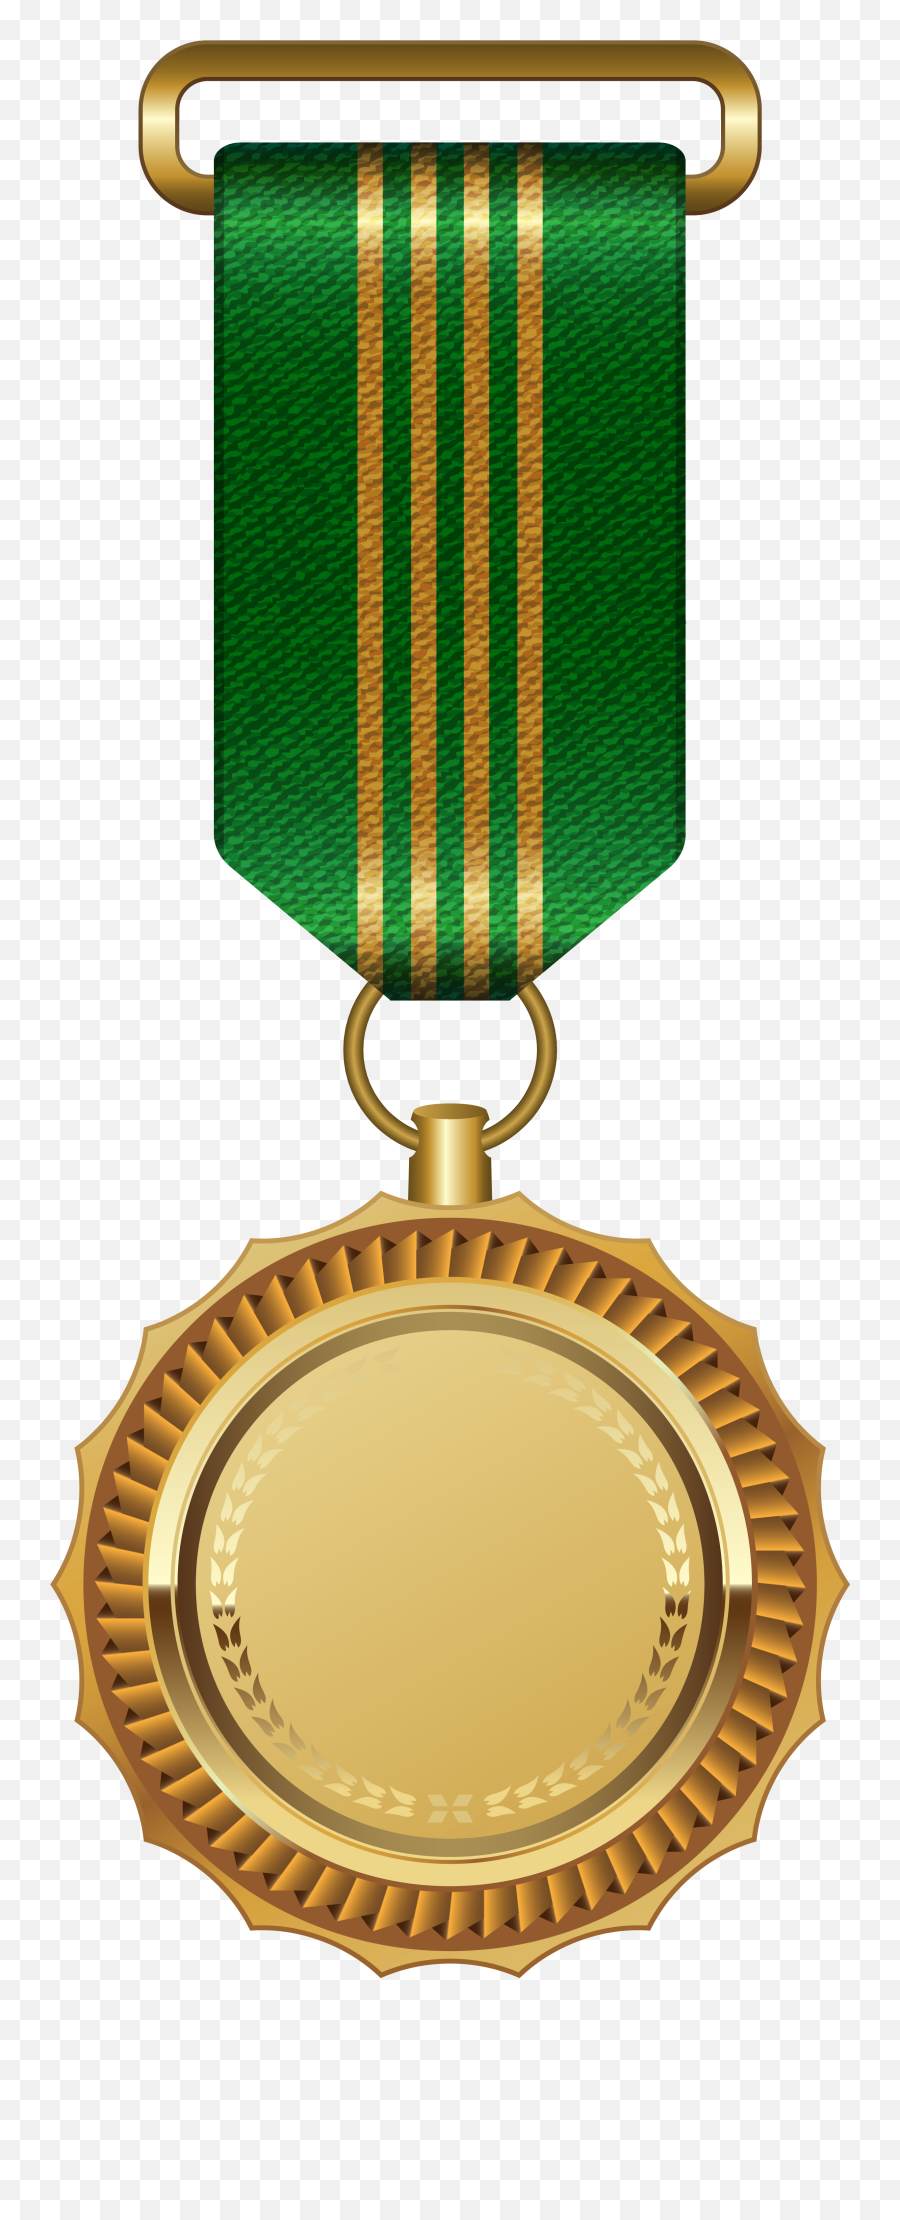 Green Ribbon Png Clipart Image - Gold Medal With Green Ribbon,Green Ribbon Png